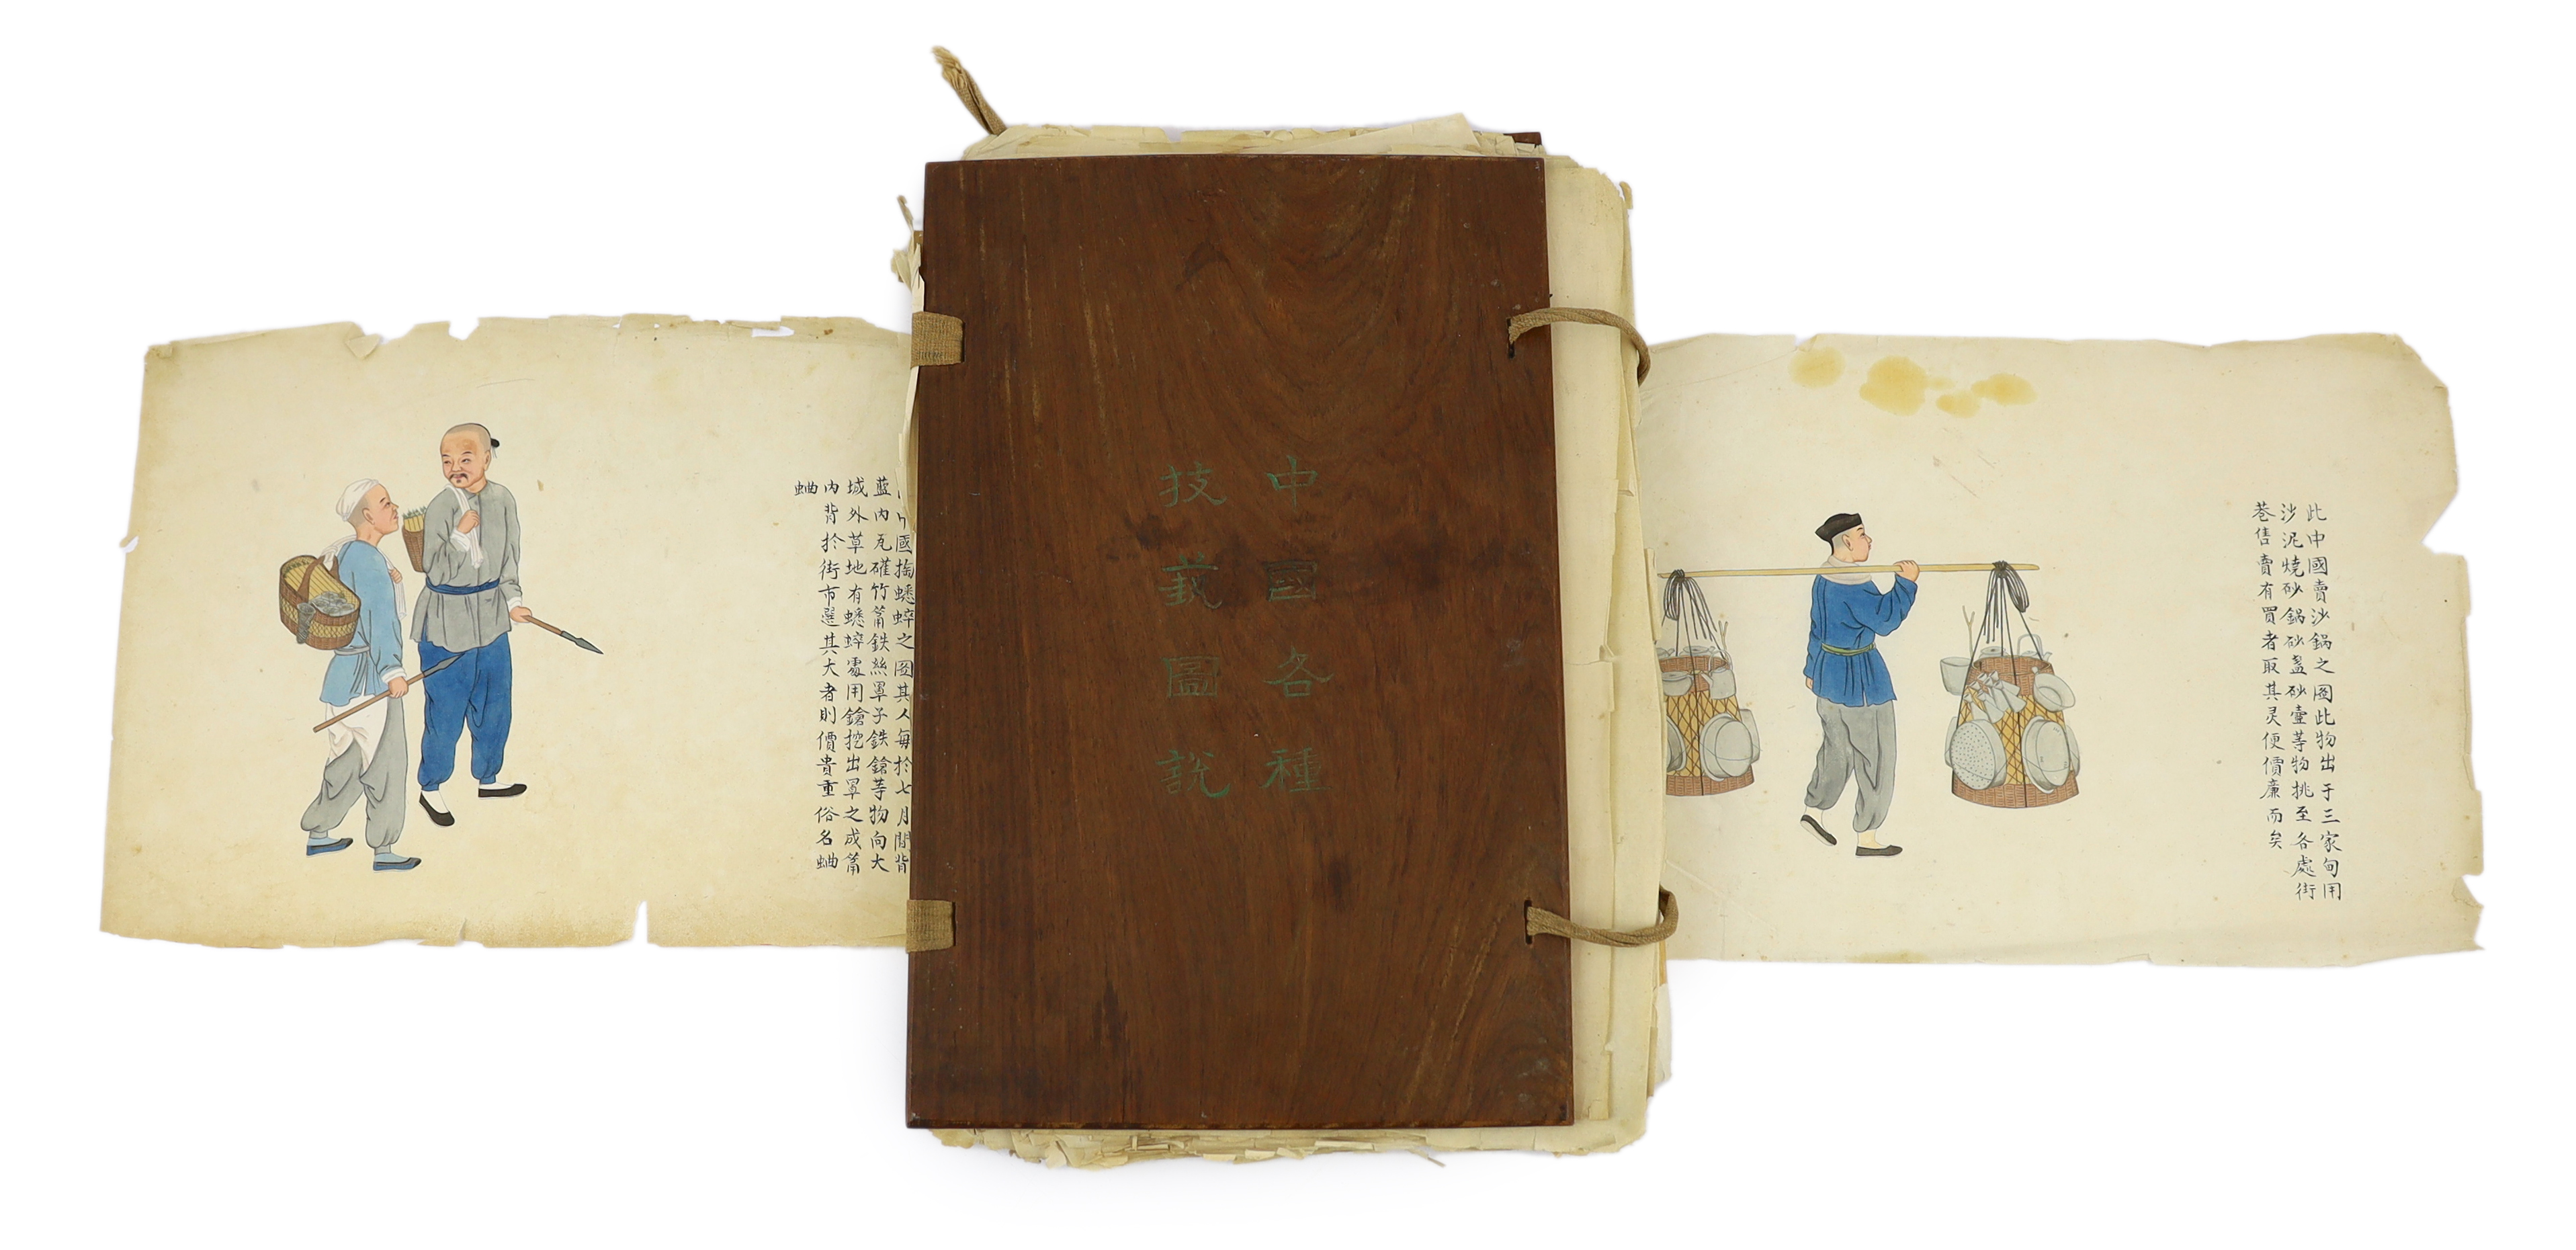 An album of Chinese watercolours on rice paper, trades and customs of China, late 19th / early 20th century, losses and tears to most pages                                                                                 